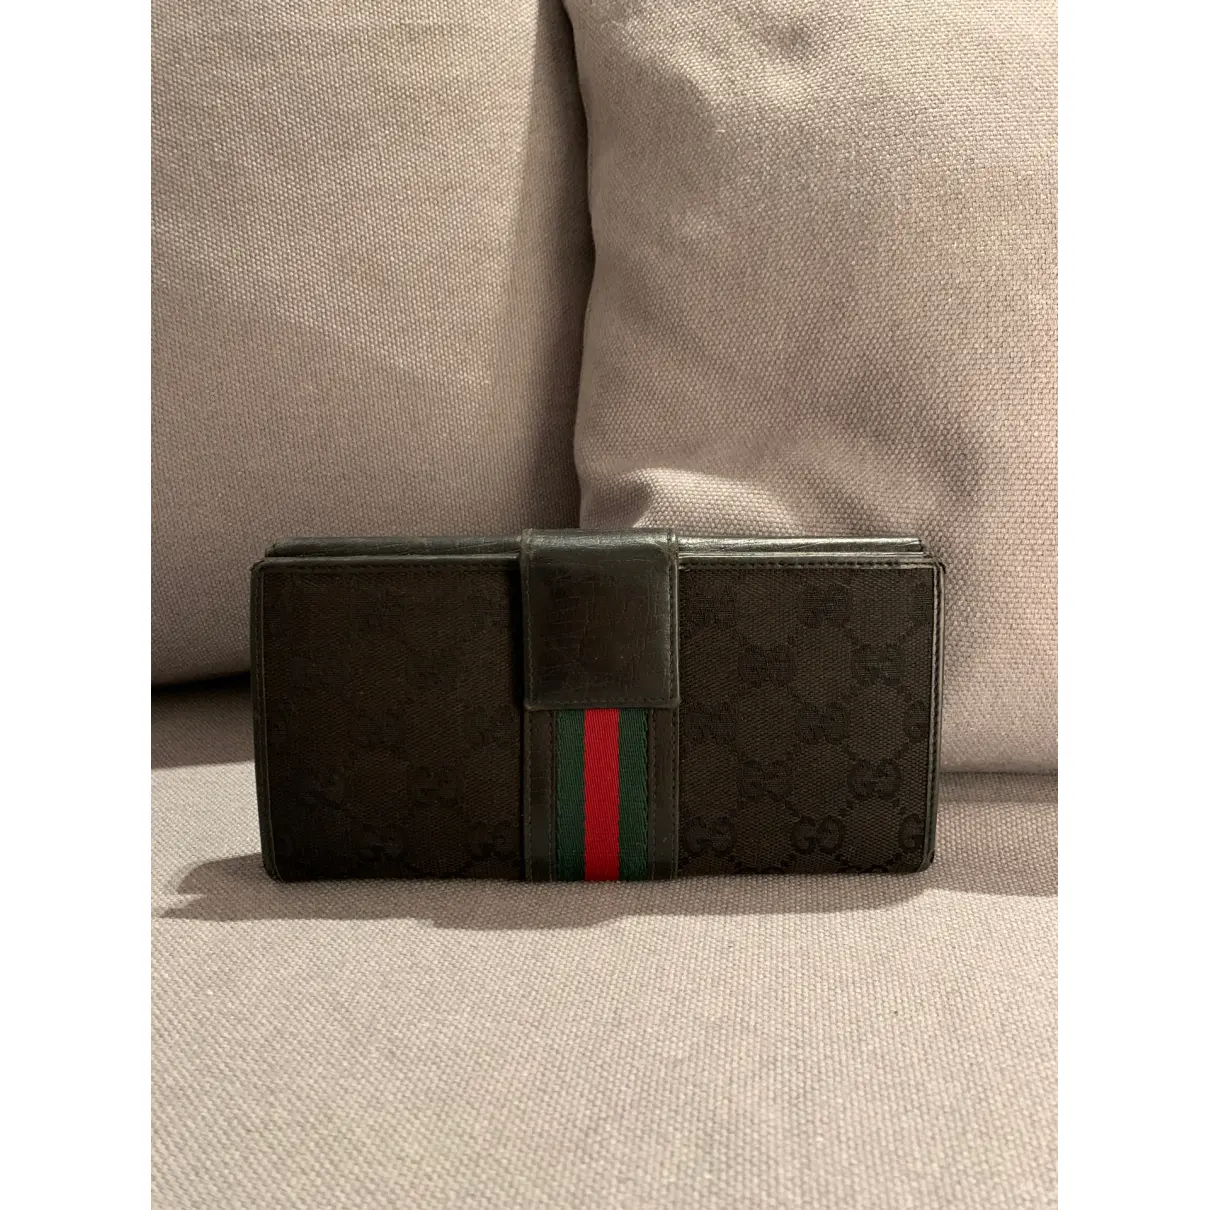 Buy Gucci Ophidia leather wallet online